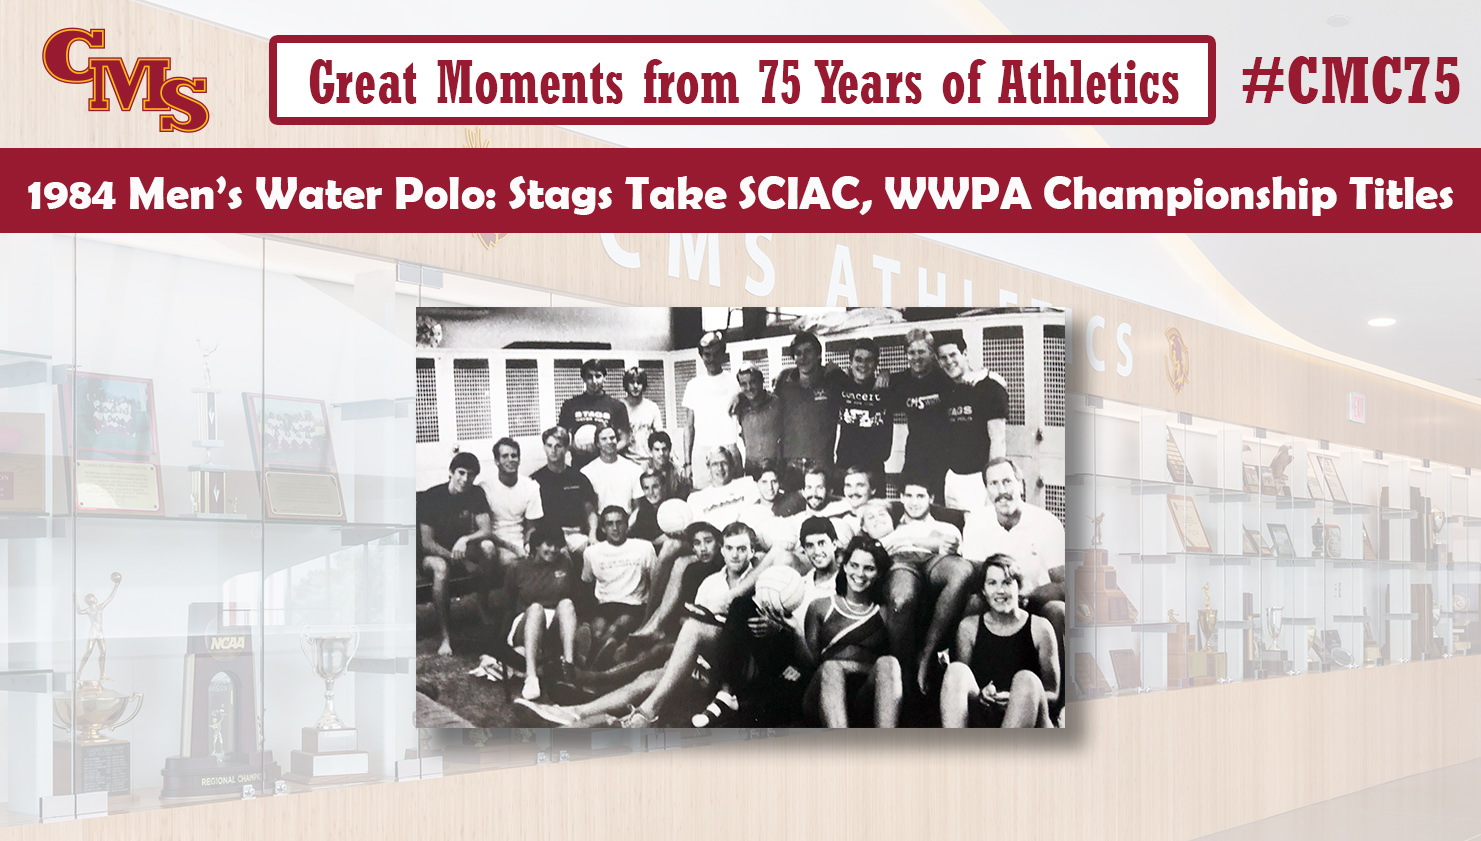 Team shot of the 1984 men's water polo team. Words over the photo read: Great Moments from 75 Years of Athletics: 1984 Men's Water Polo: Stags Take SCIAC, WWPA Titles